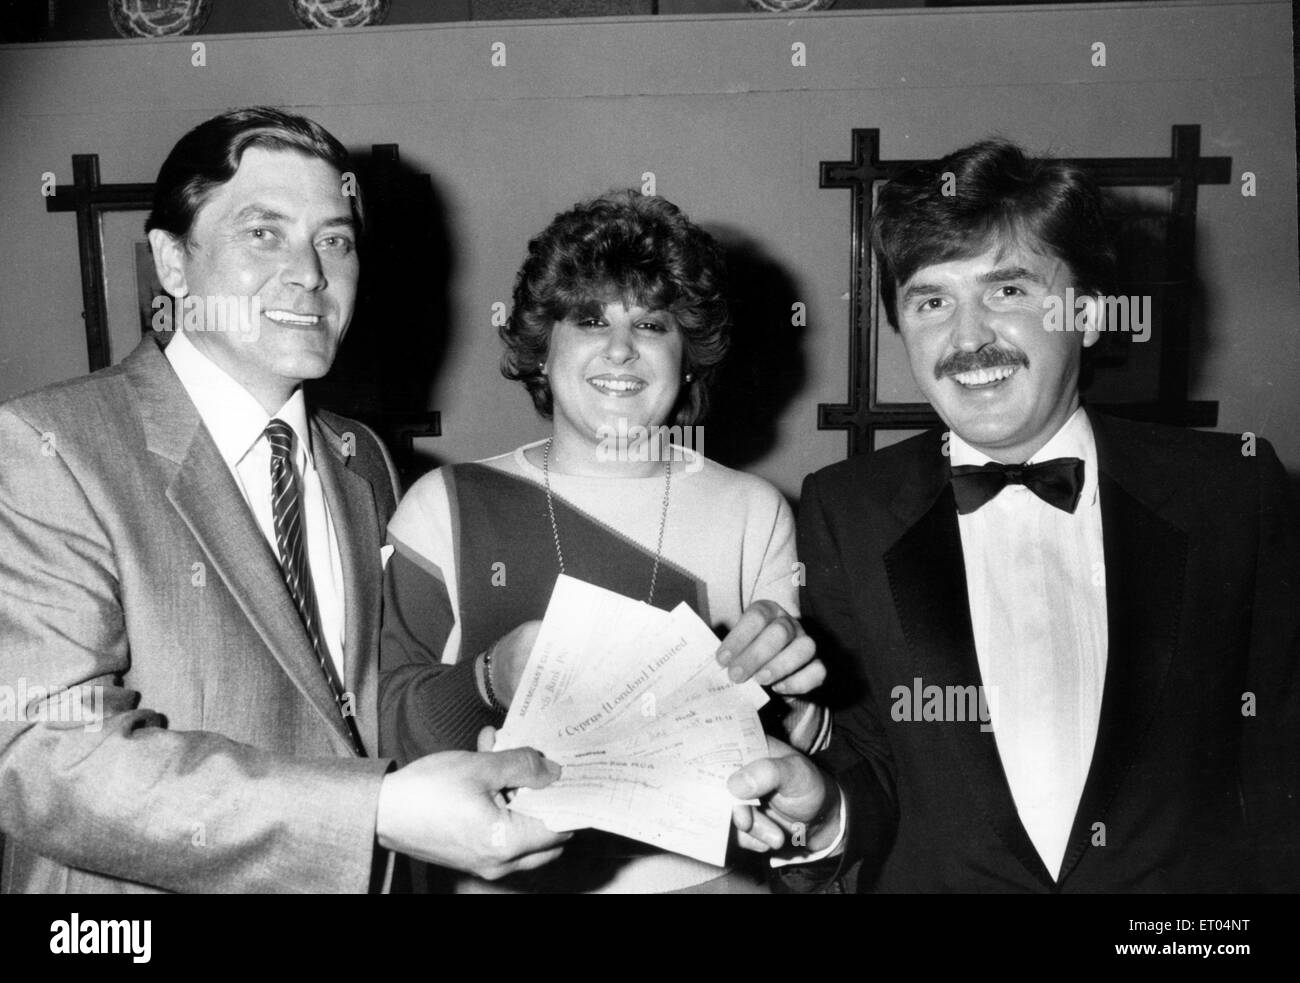 Patrons at Maximillian's nightclub in Birmingham have raised just over £2,300 for young Worcester boy, Andrew Combs, who was horrifically burned at his home. Head doorman Gerald Smith is pictured handing over the cheque with wine bar manageress Catherine Perruzza to fund trustee Mr Alois Gough. 15th August 1985. Stock Photo